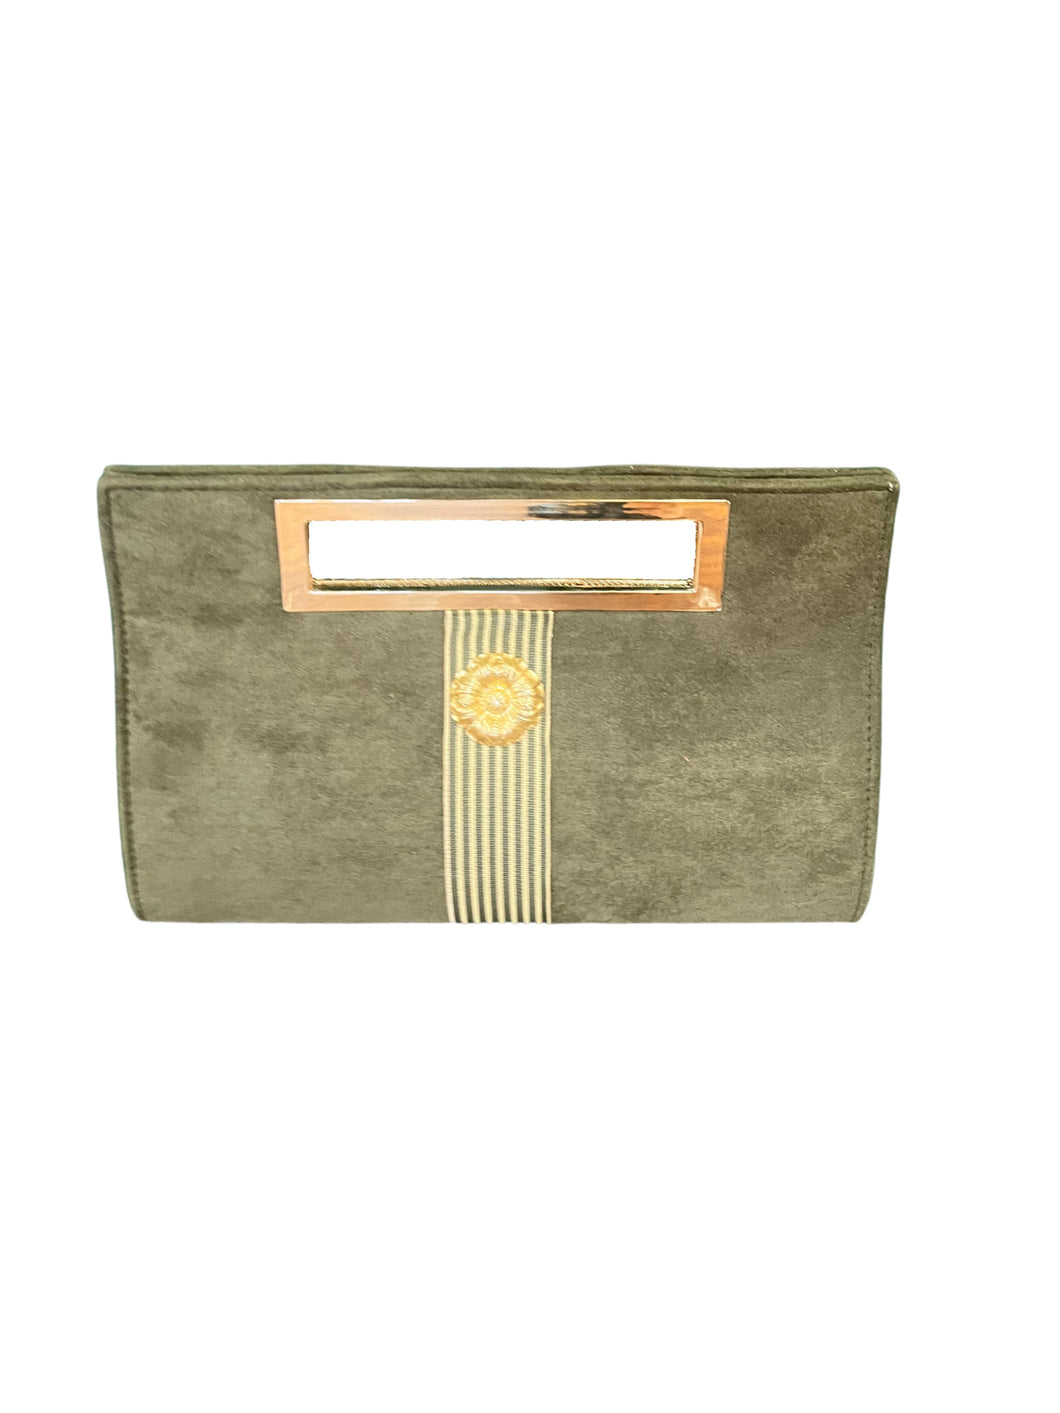 Chloe Olive Suede Clutch, Striped Ribbon & Blossom